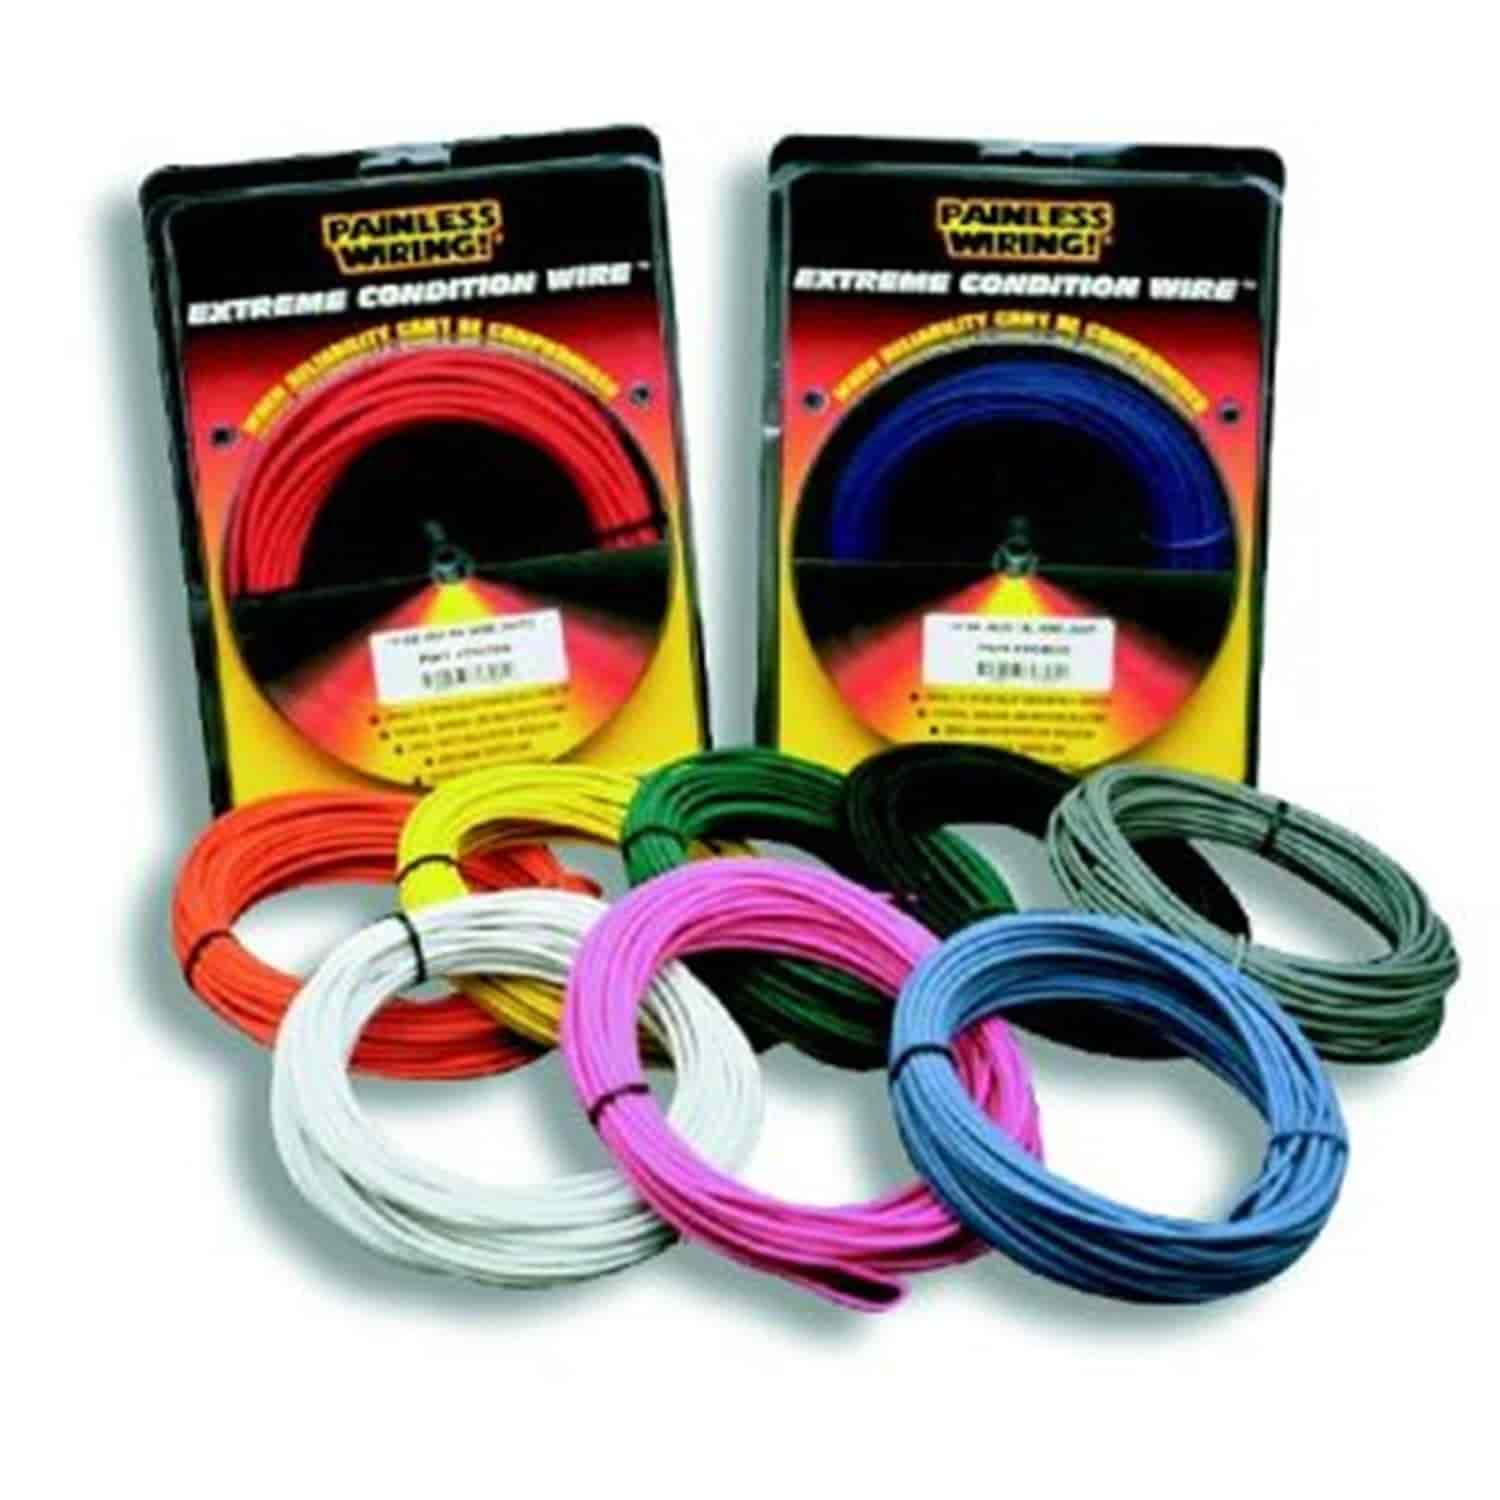 Extreme Condition Wire 10-Gauge